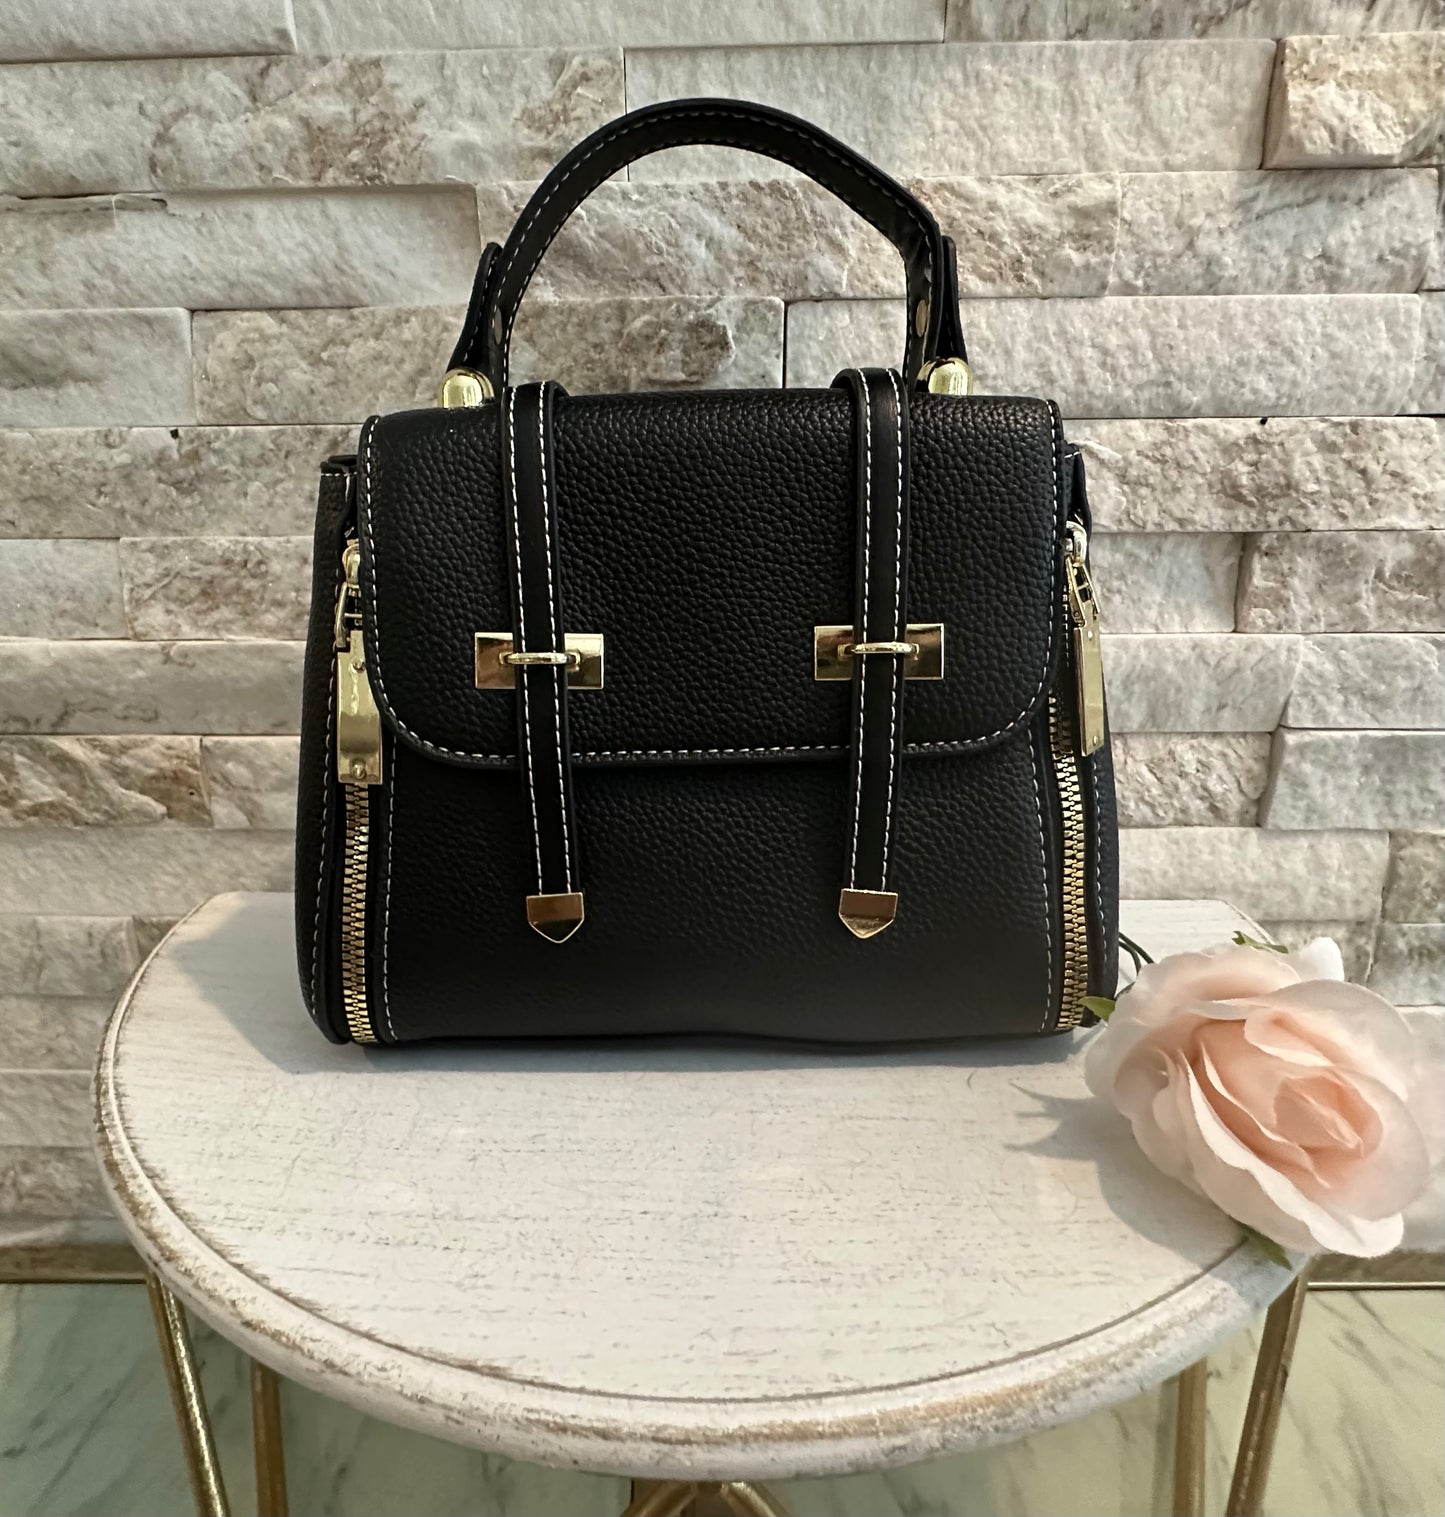 19 Black and Gold Small Satchel Bag